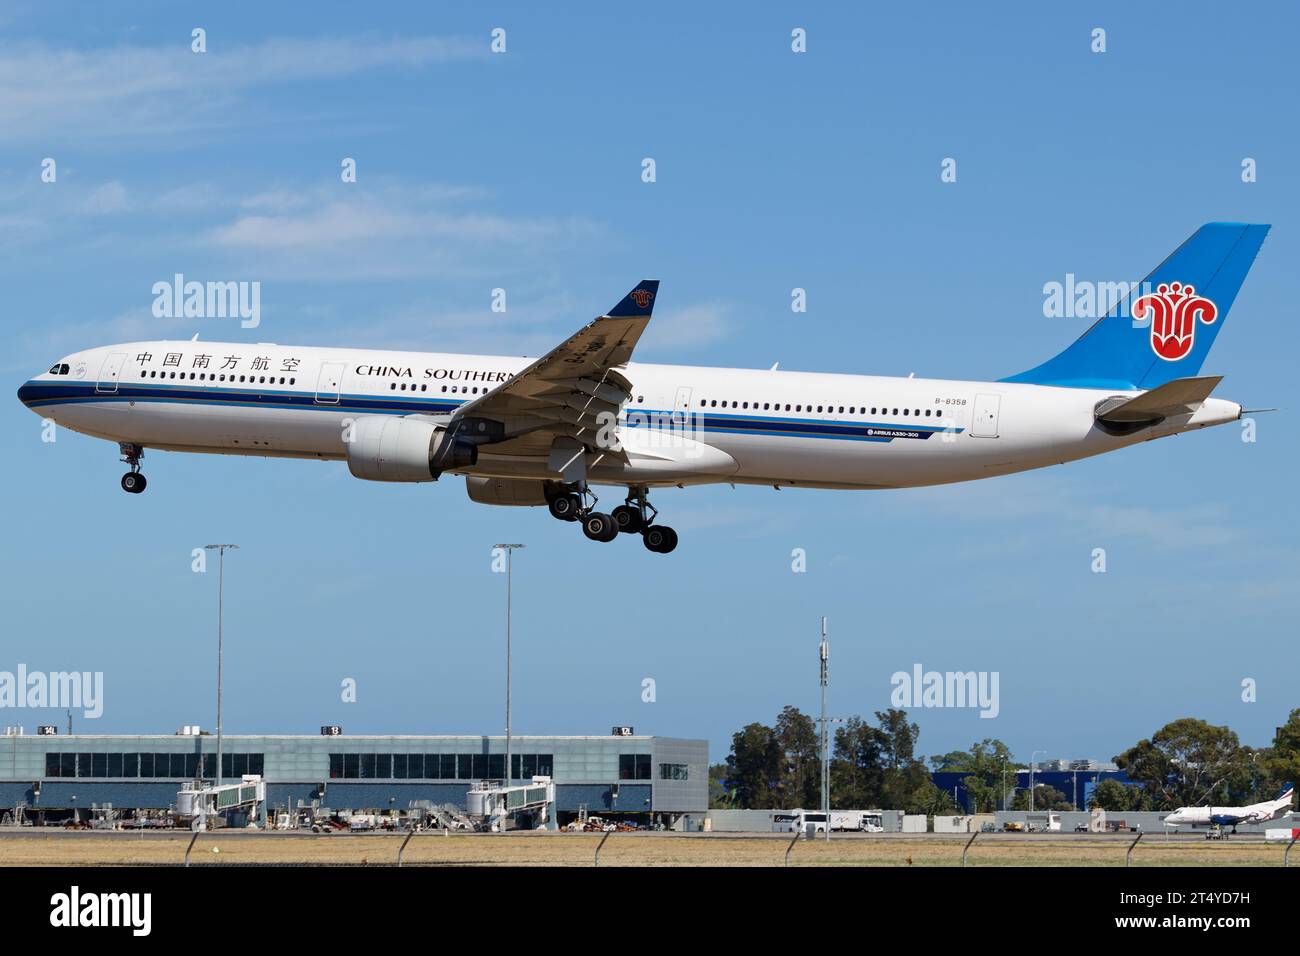 China Southern Airlines Airbus A330-300 seen on final approach into Adelaide Airport. Stock Photo